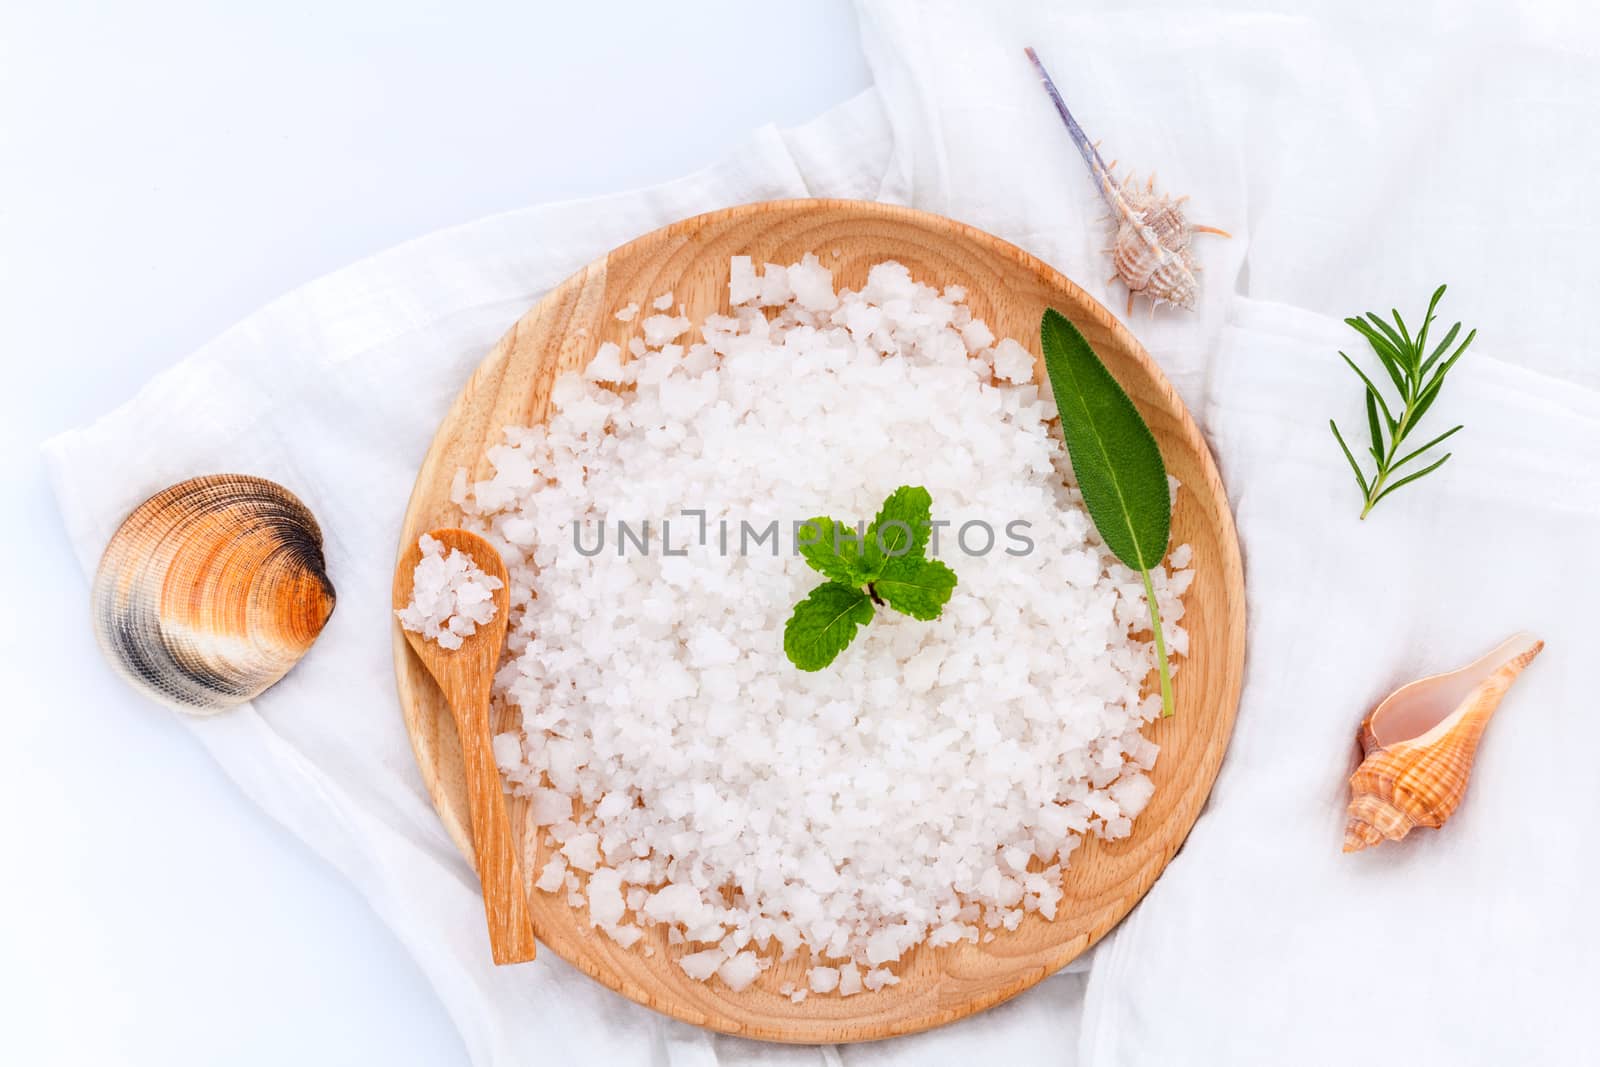  Sea salt natural spa ingredients ,herbs and sea shells for scrub and skin care isolate on white background.